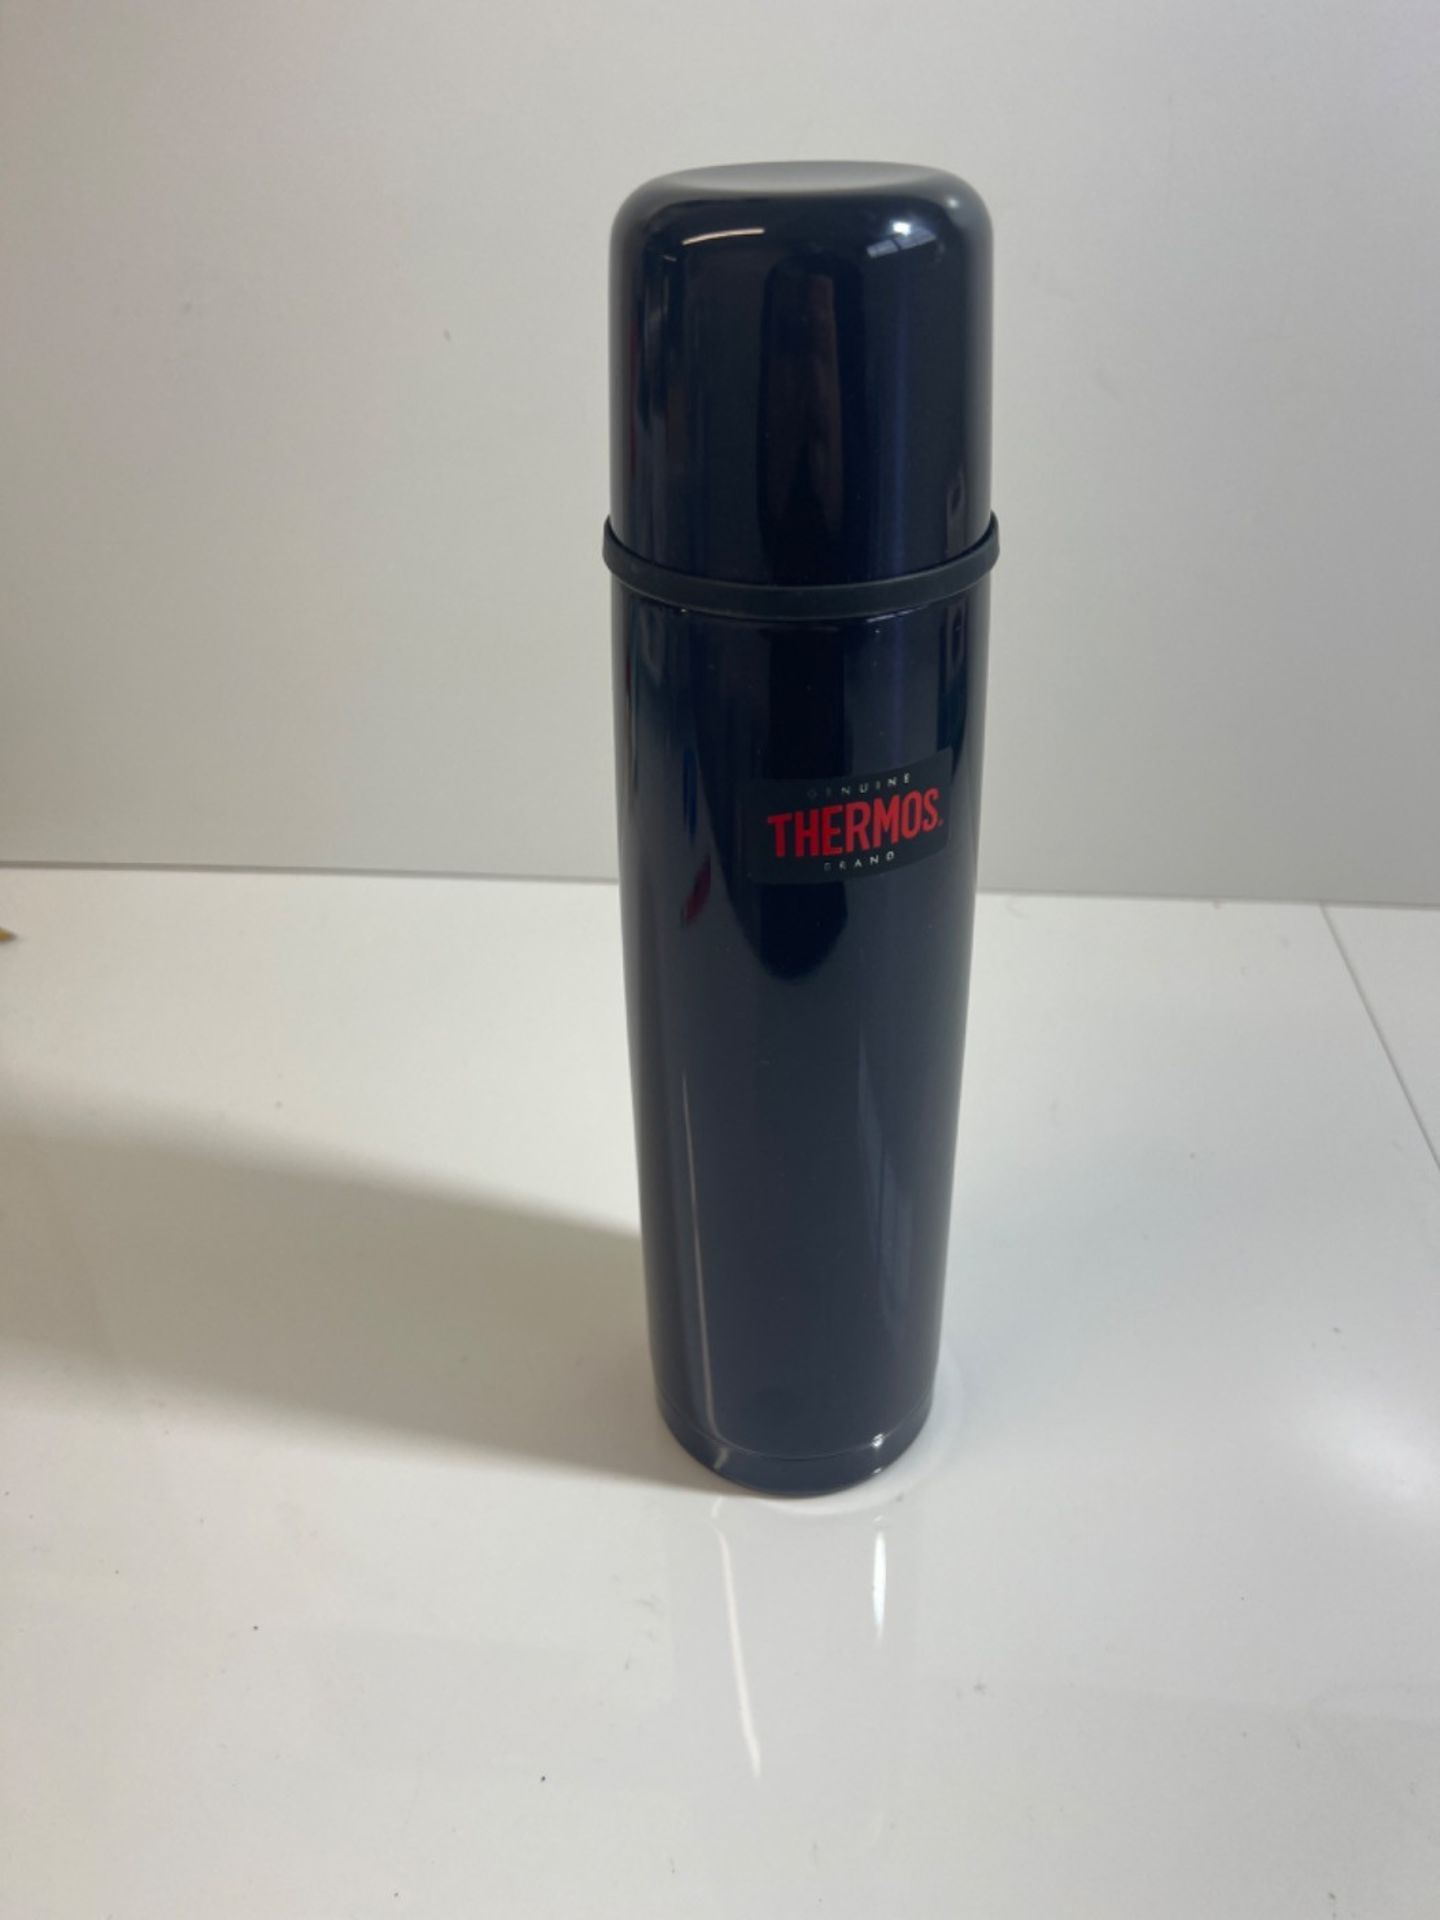 Thermos 185515 Light and Compact Flask, Midnight Blue, 1L - Image 2 of 2